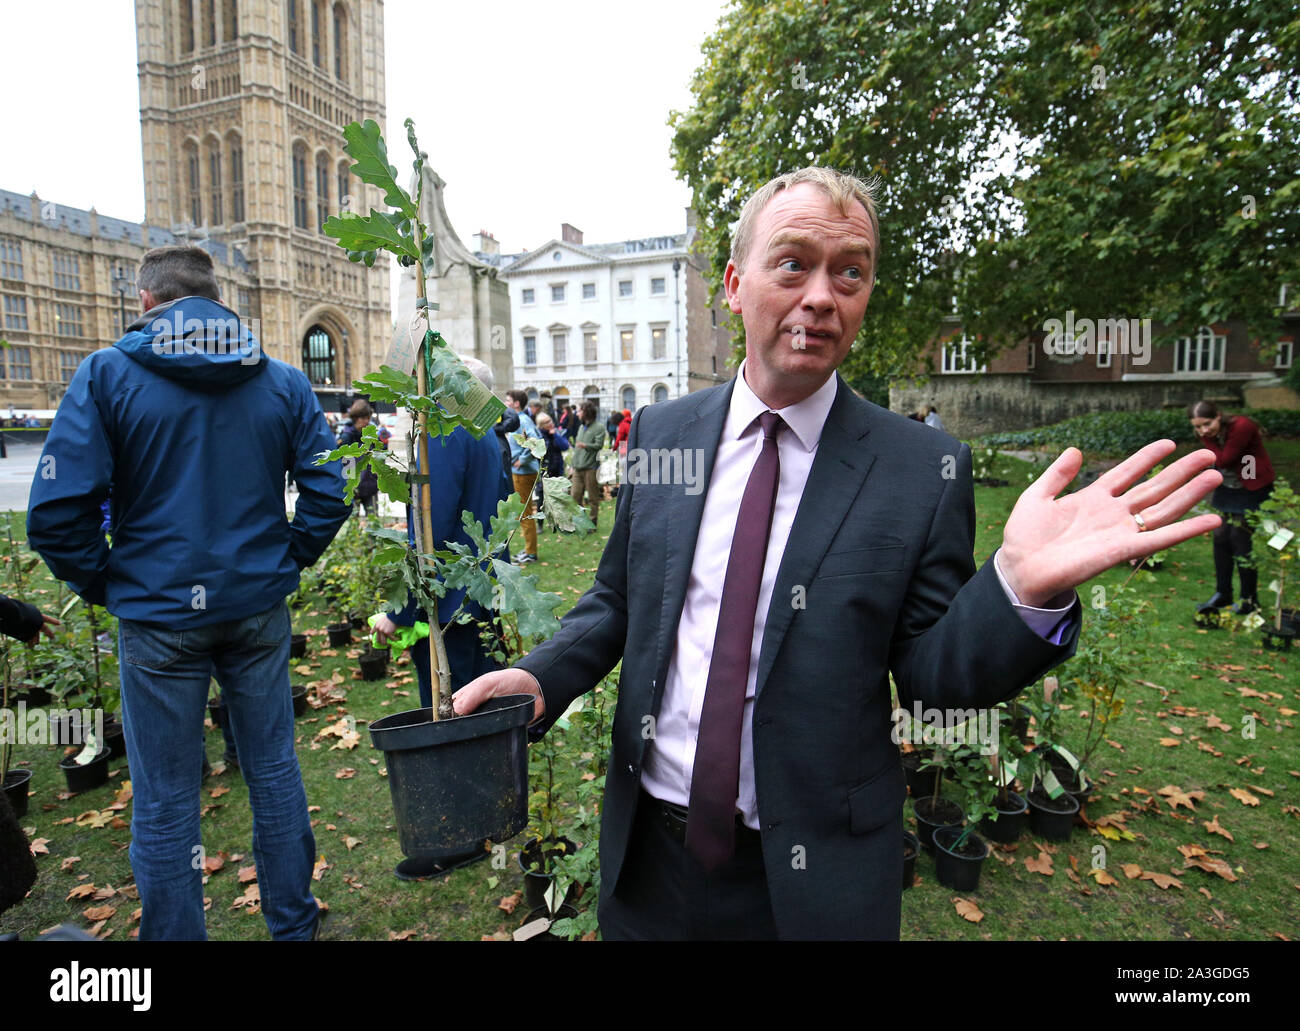 Liberal Democrat MP, Tim Farron, near Old Palace Yard outside Parliament, holding a sapling, amongst those placed by protesters, during an Extinction Rebellion (XR) protest in Westminster, London. Stock Photo